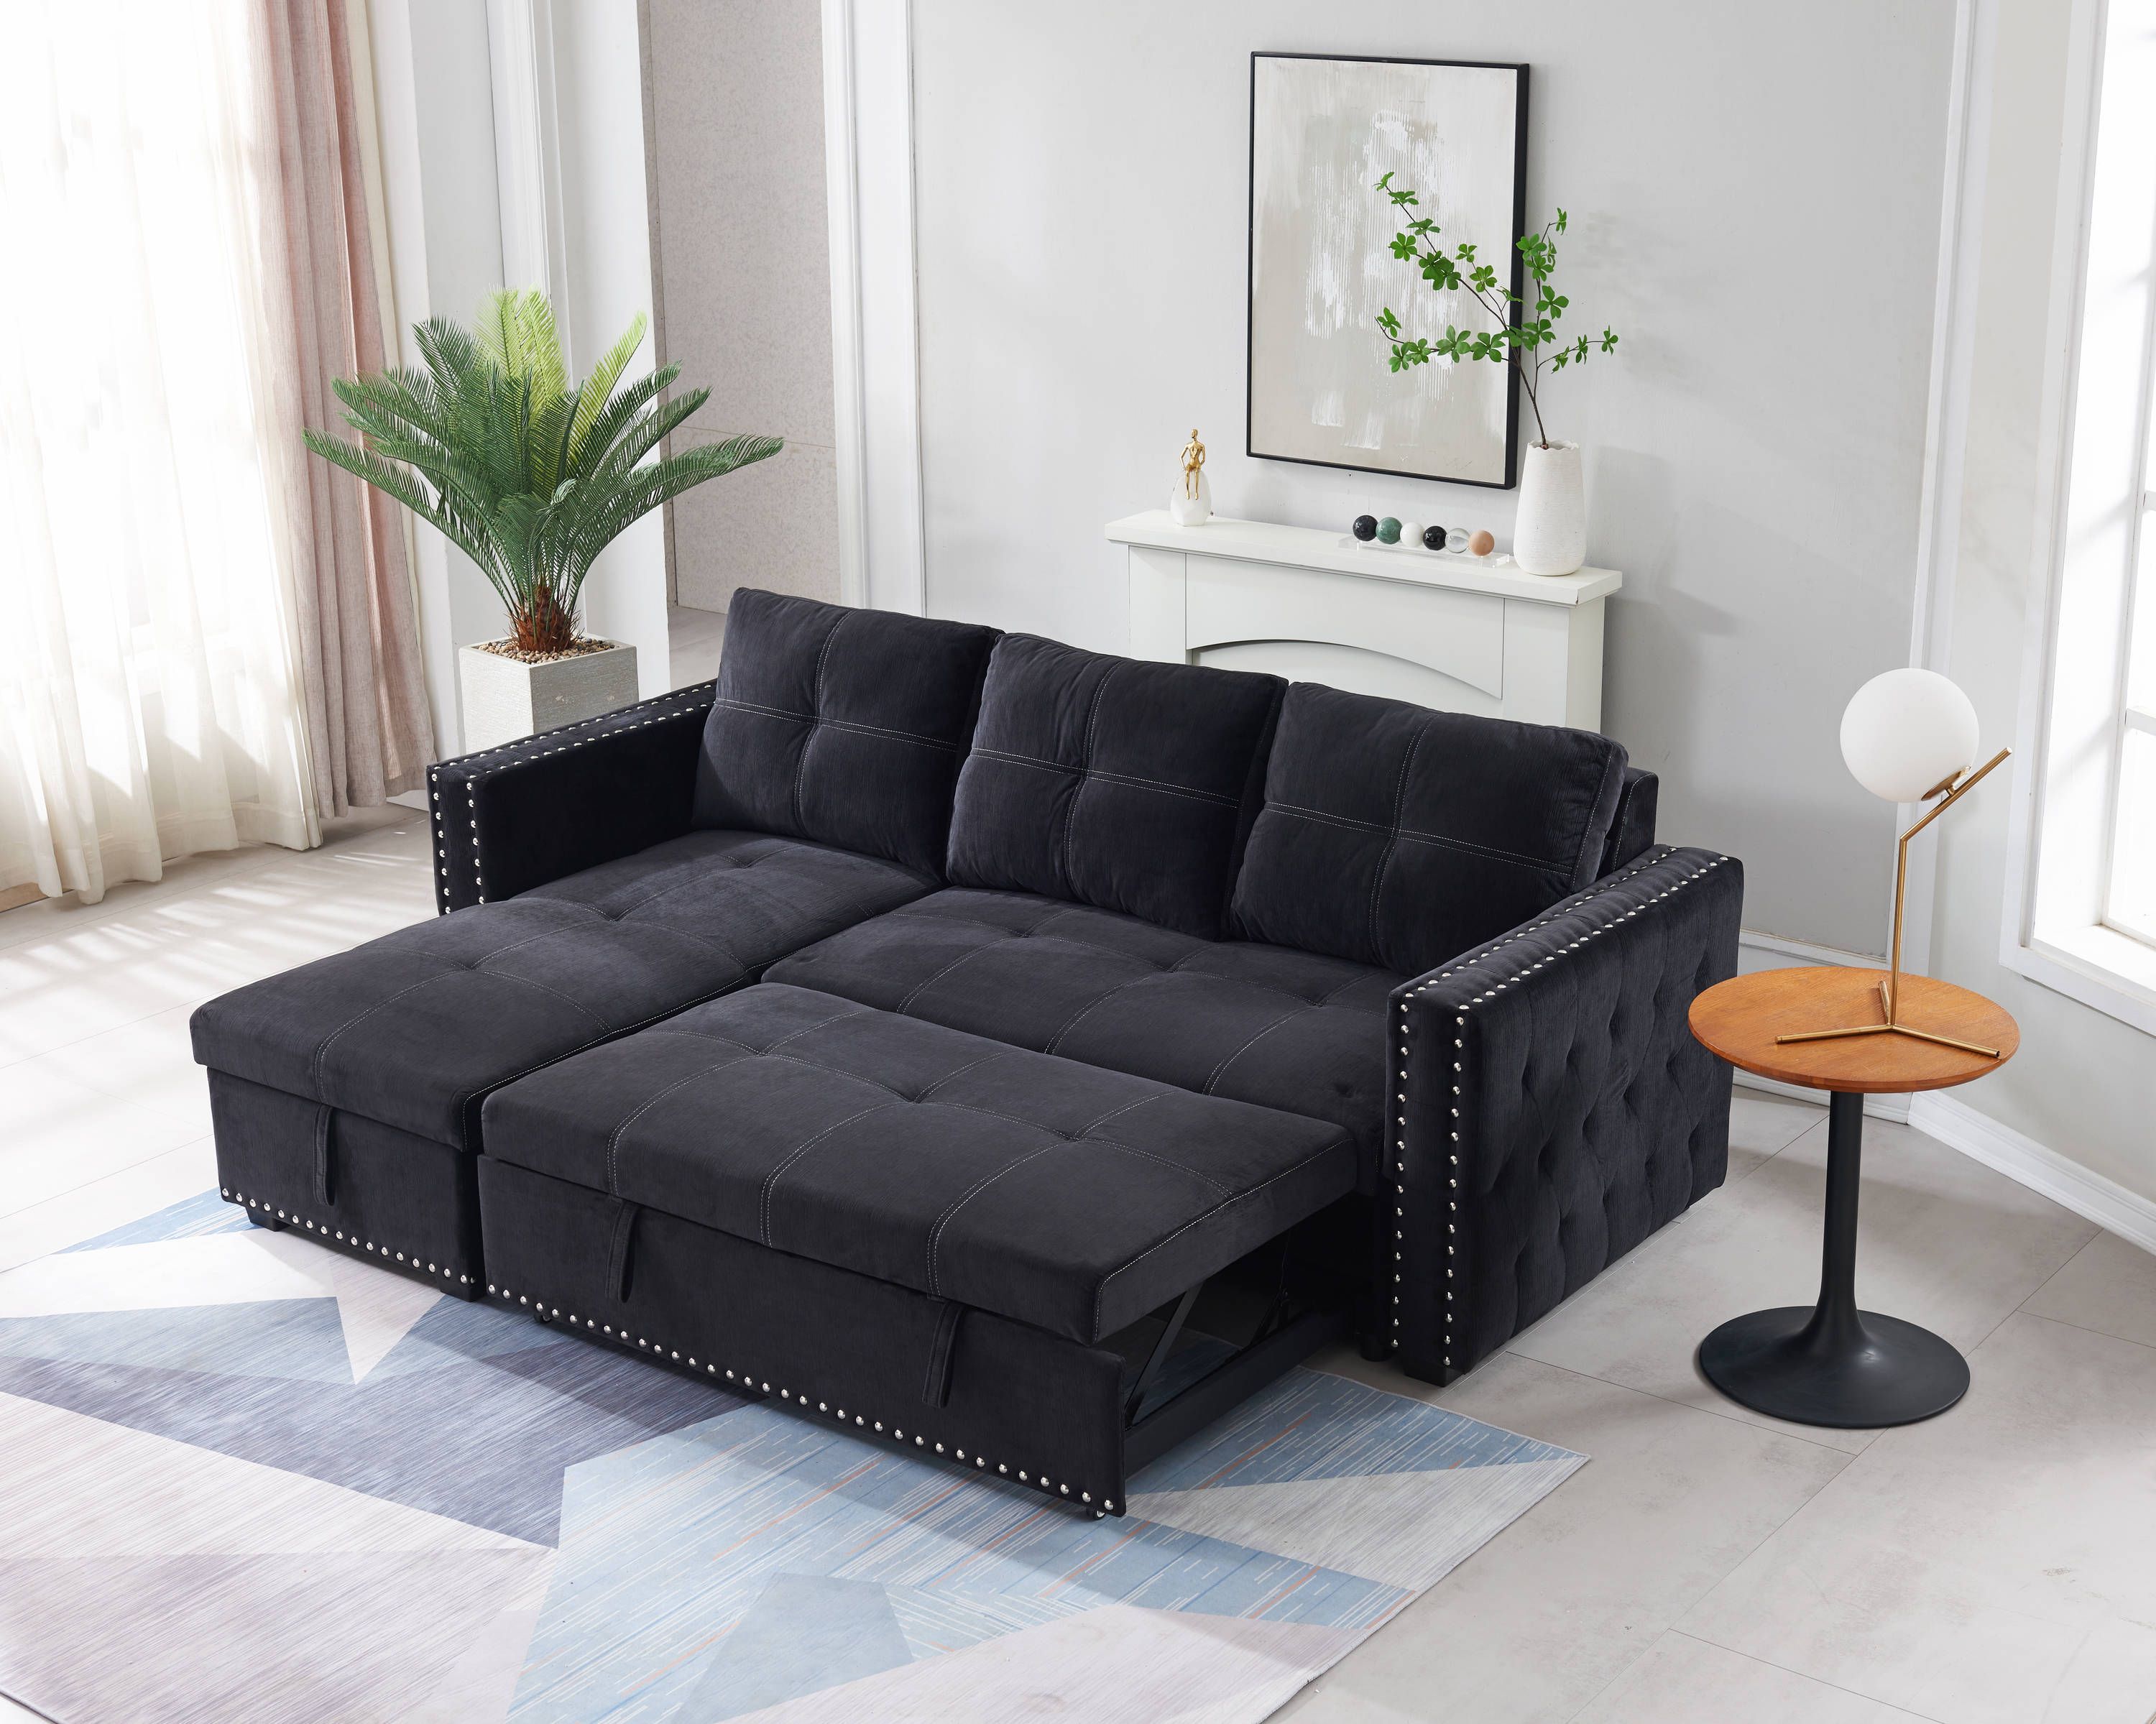 Clihome Sofa With Pulled Out Bed Modern Black Polyester/blend Sleeper In  The Couches, Sofas & Loveseats Department At Lowes Intended For Pull Out Couch Beds (View 4 of 20)